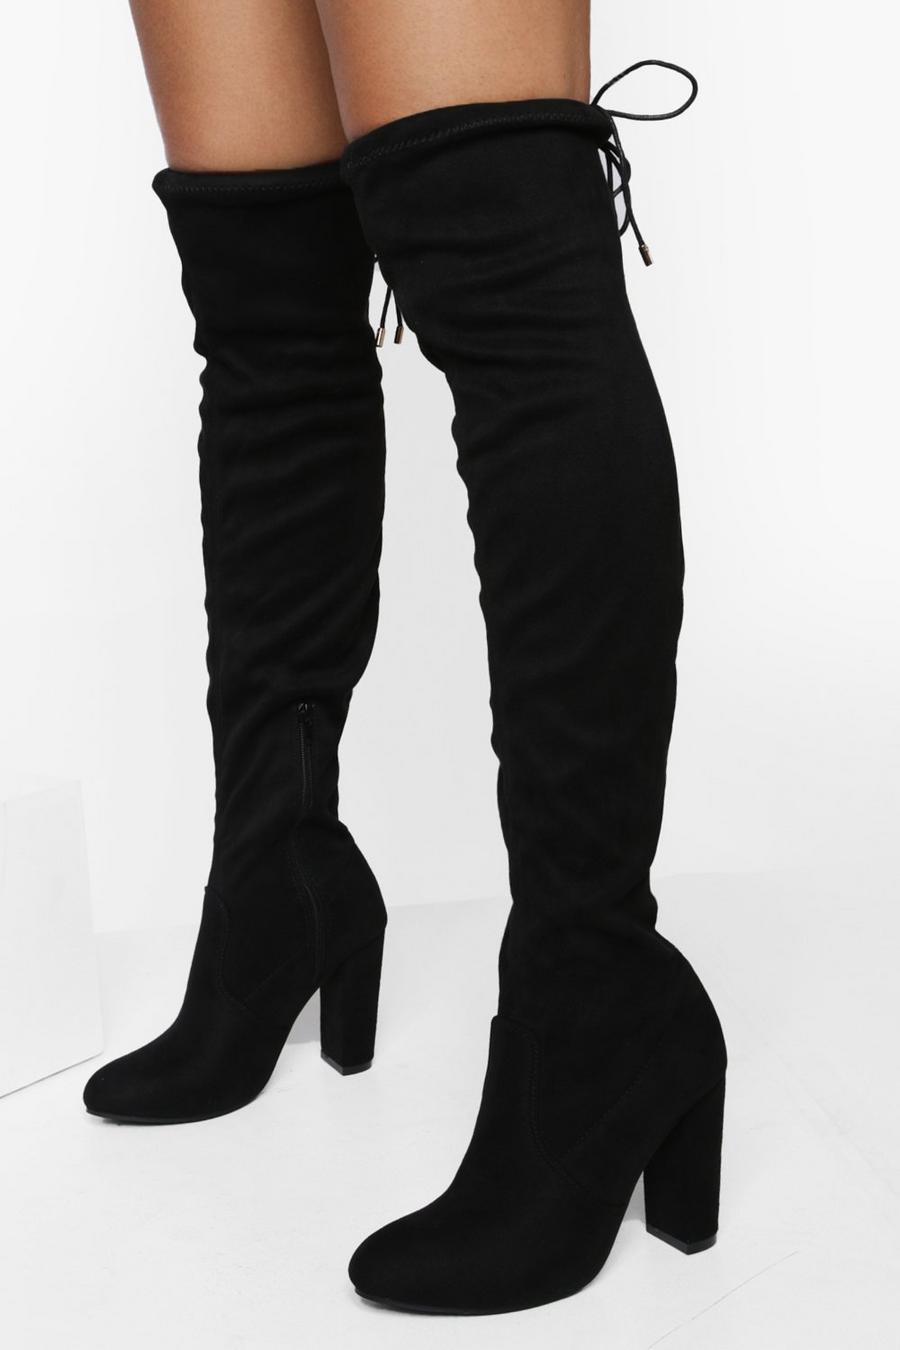 Black Geox low wedge lace-up boots